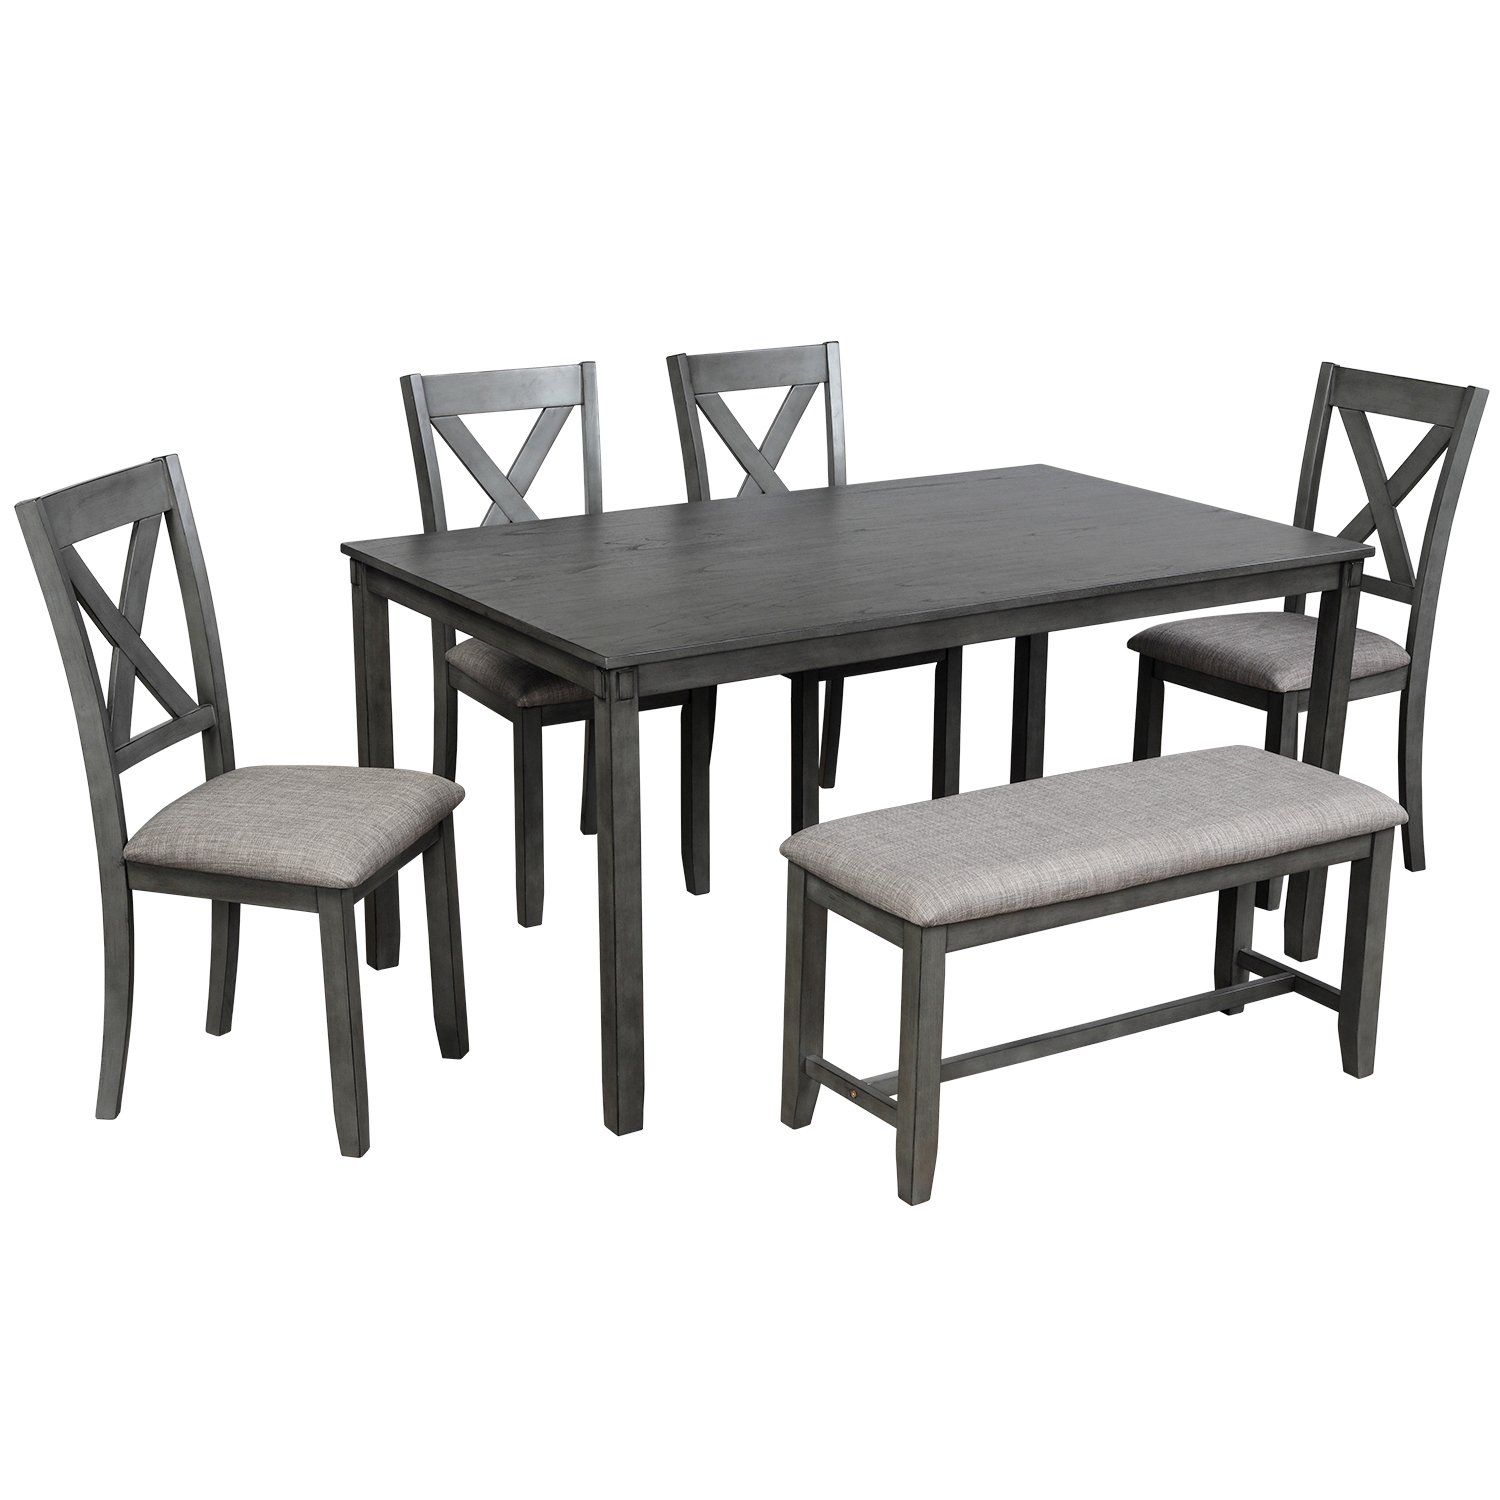 6-Piece Kitchen Dining Table Set Wooden Rectangular Dining Table, 4 Dining Chair and Bench Family Furniture for 6 People (Grey)-CASAINC